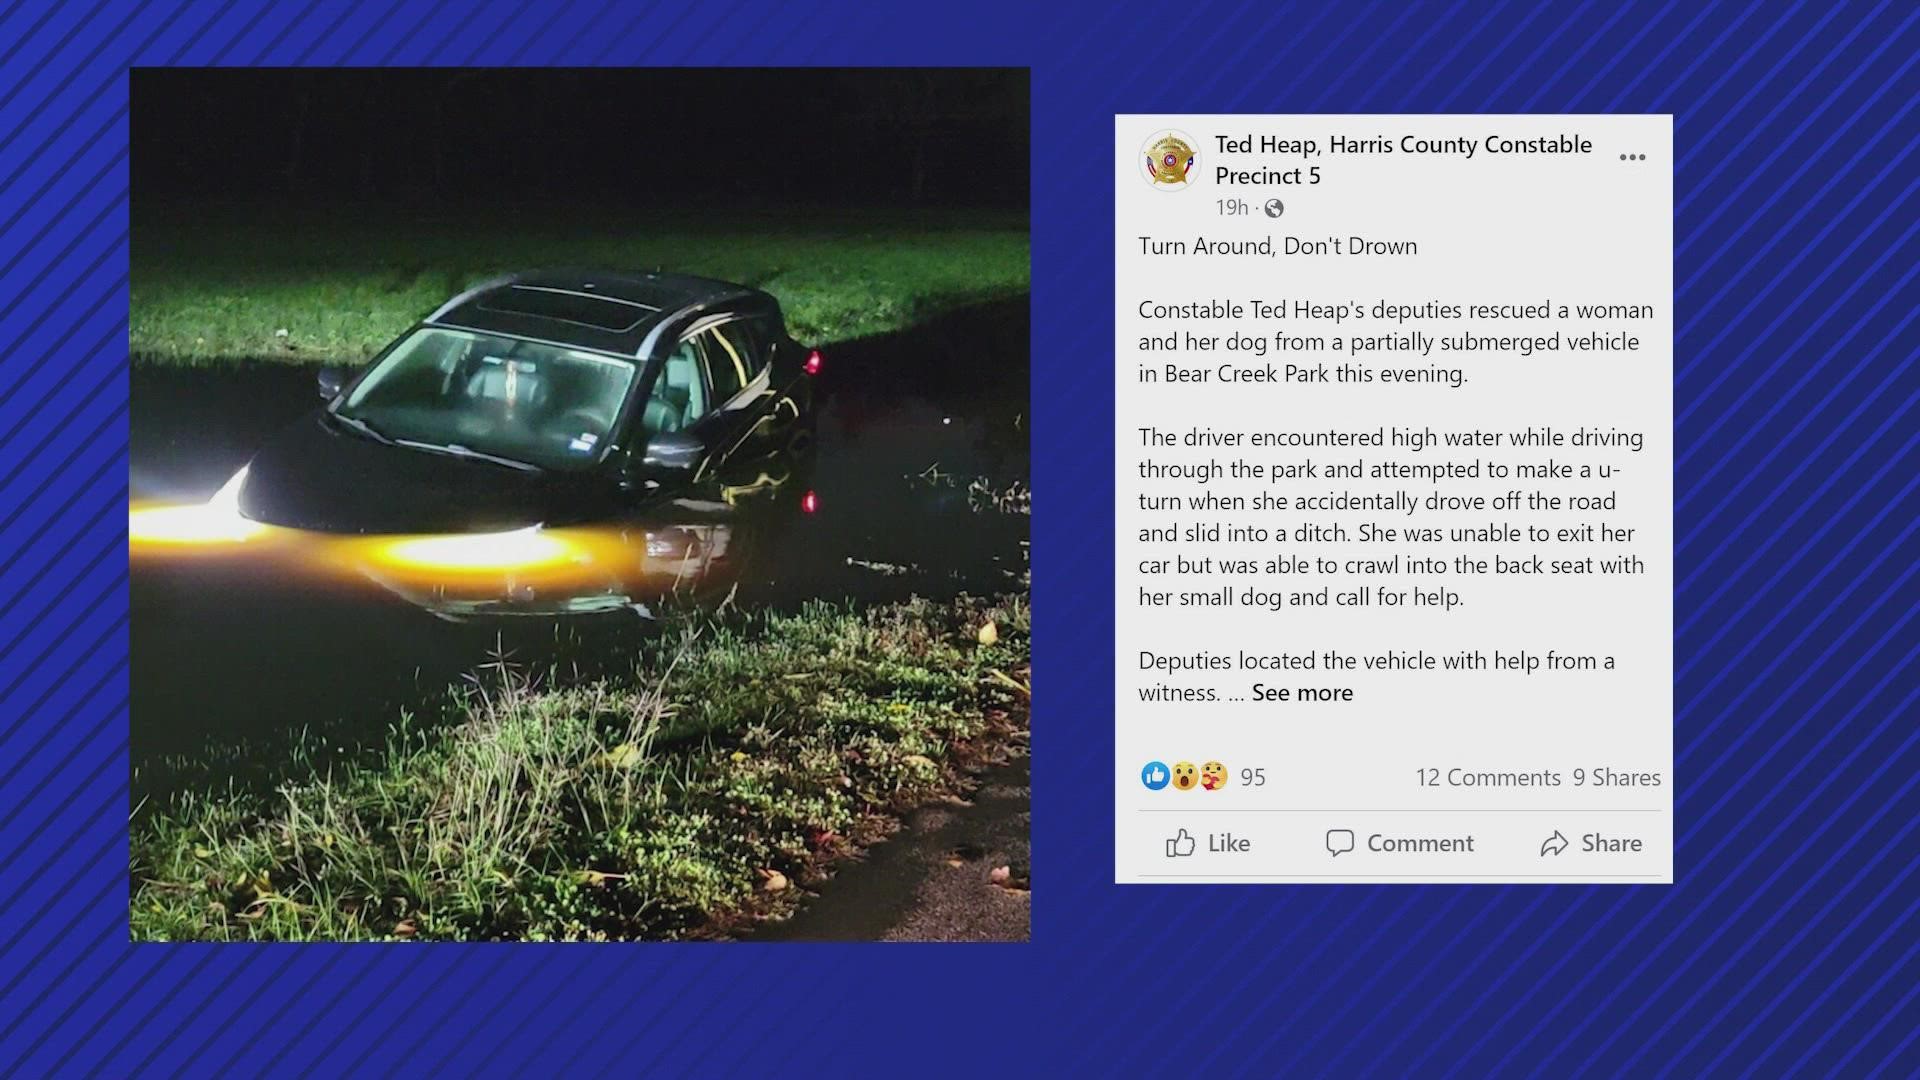 Harris County Precinct 5 deputies said they were able to rescue the woman and her dog after her car slid into a ditch.